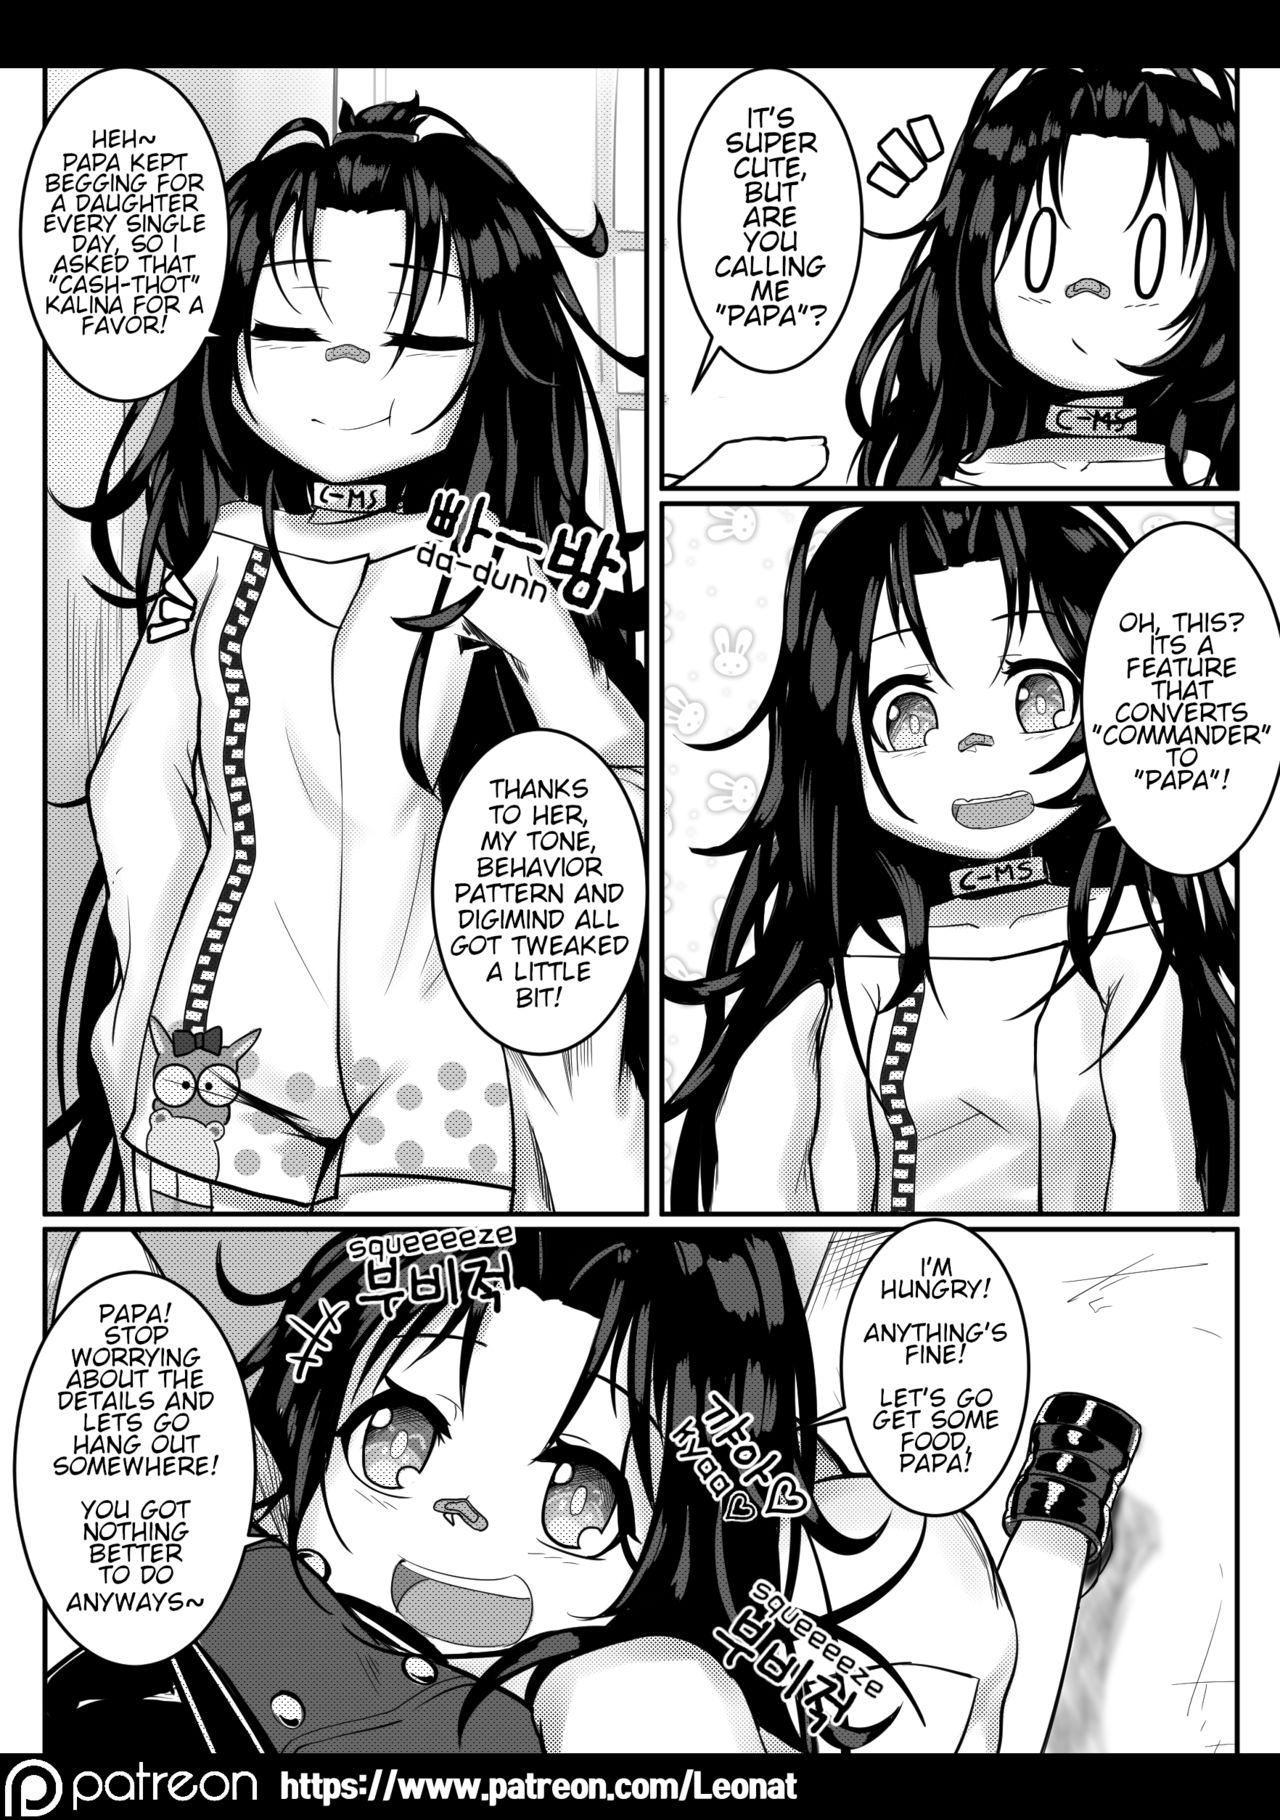 Stepmother Commander's Lounge Vol. 4 - Girls frontline Piercings - Page 7